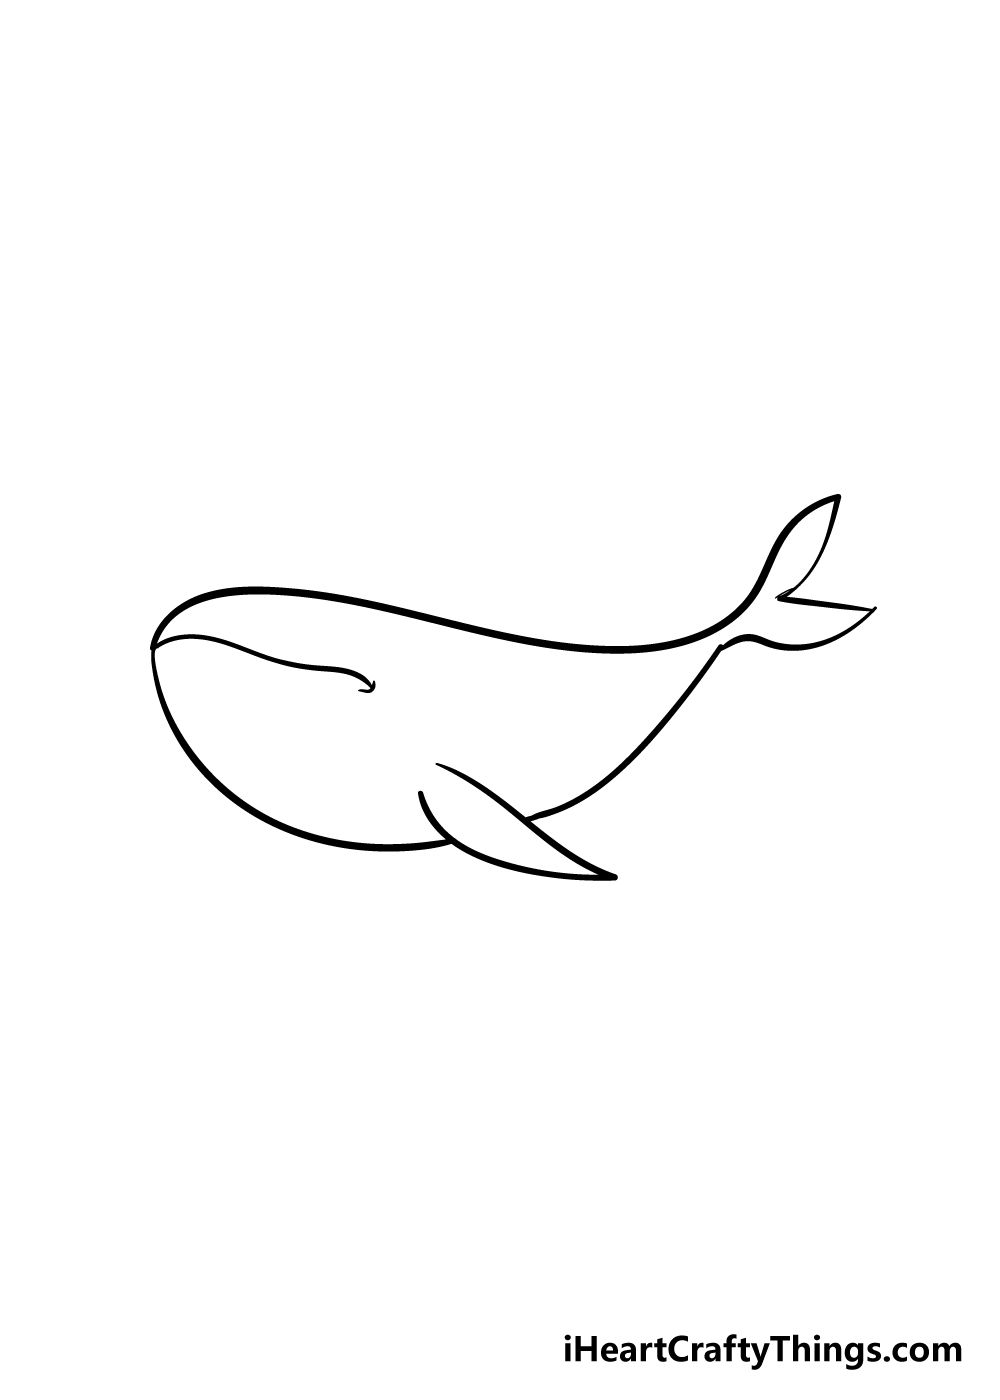 whale drawing step 3